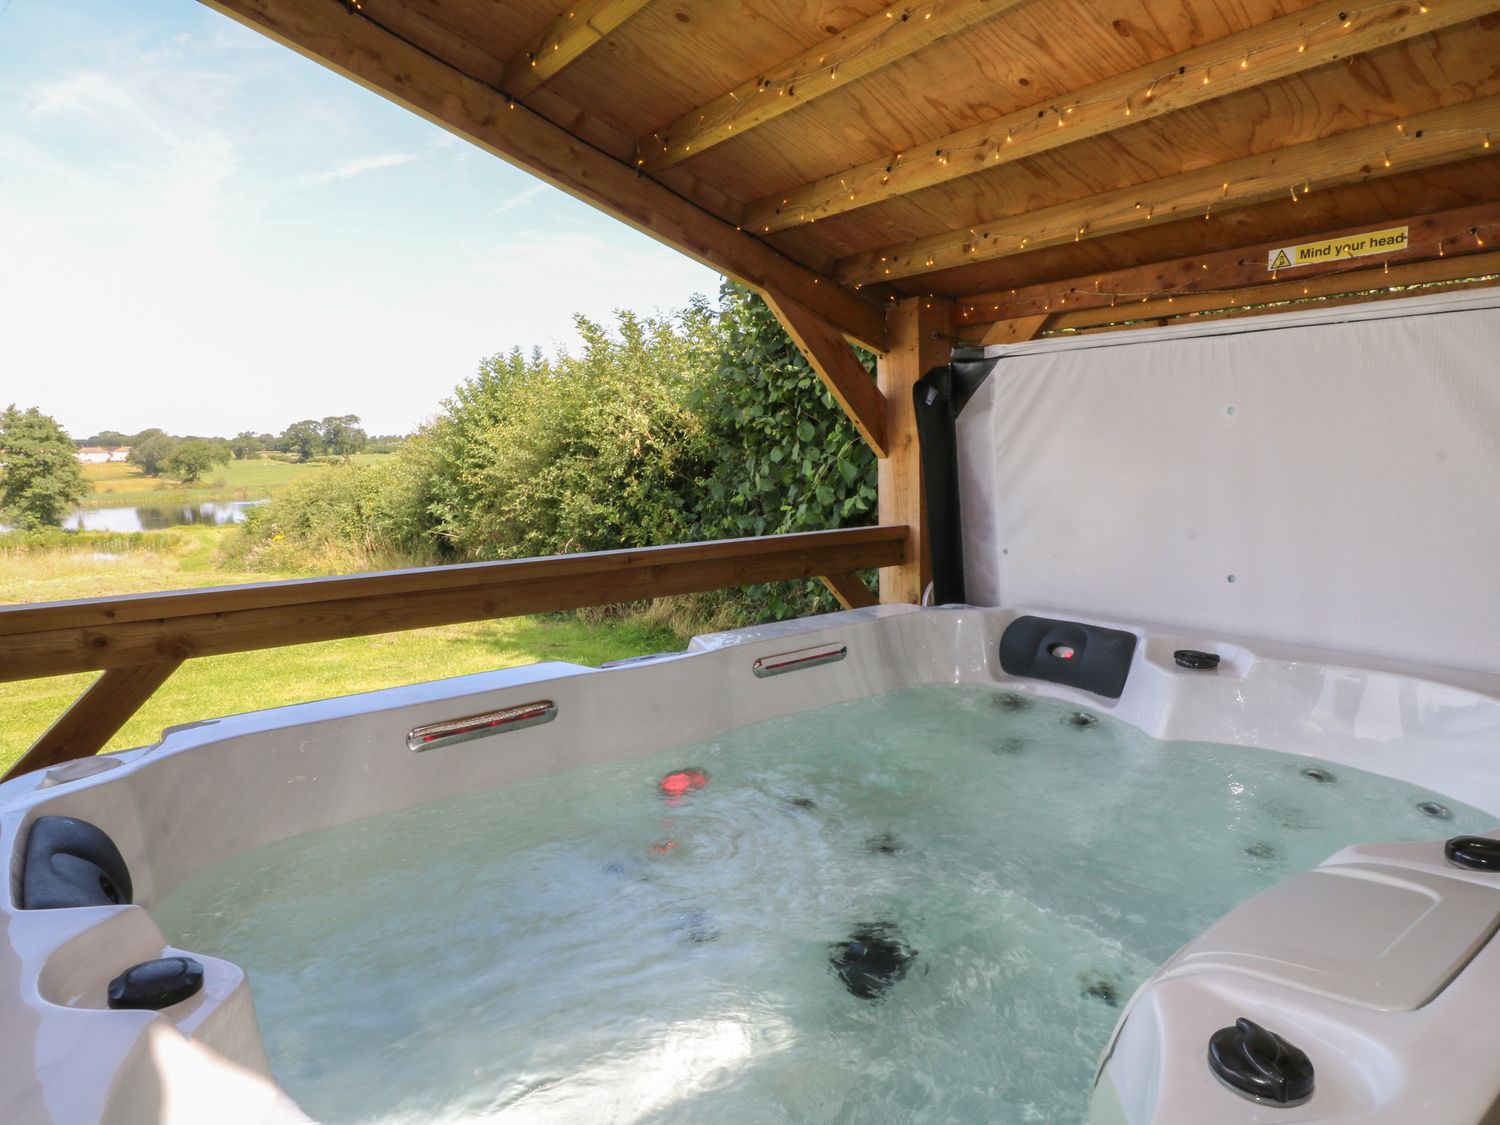 Rowan nr Donisthorpe, Leicestershire. One-bed lodge, ideal for couples with lakeside views. Hot tub.